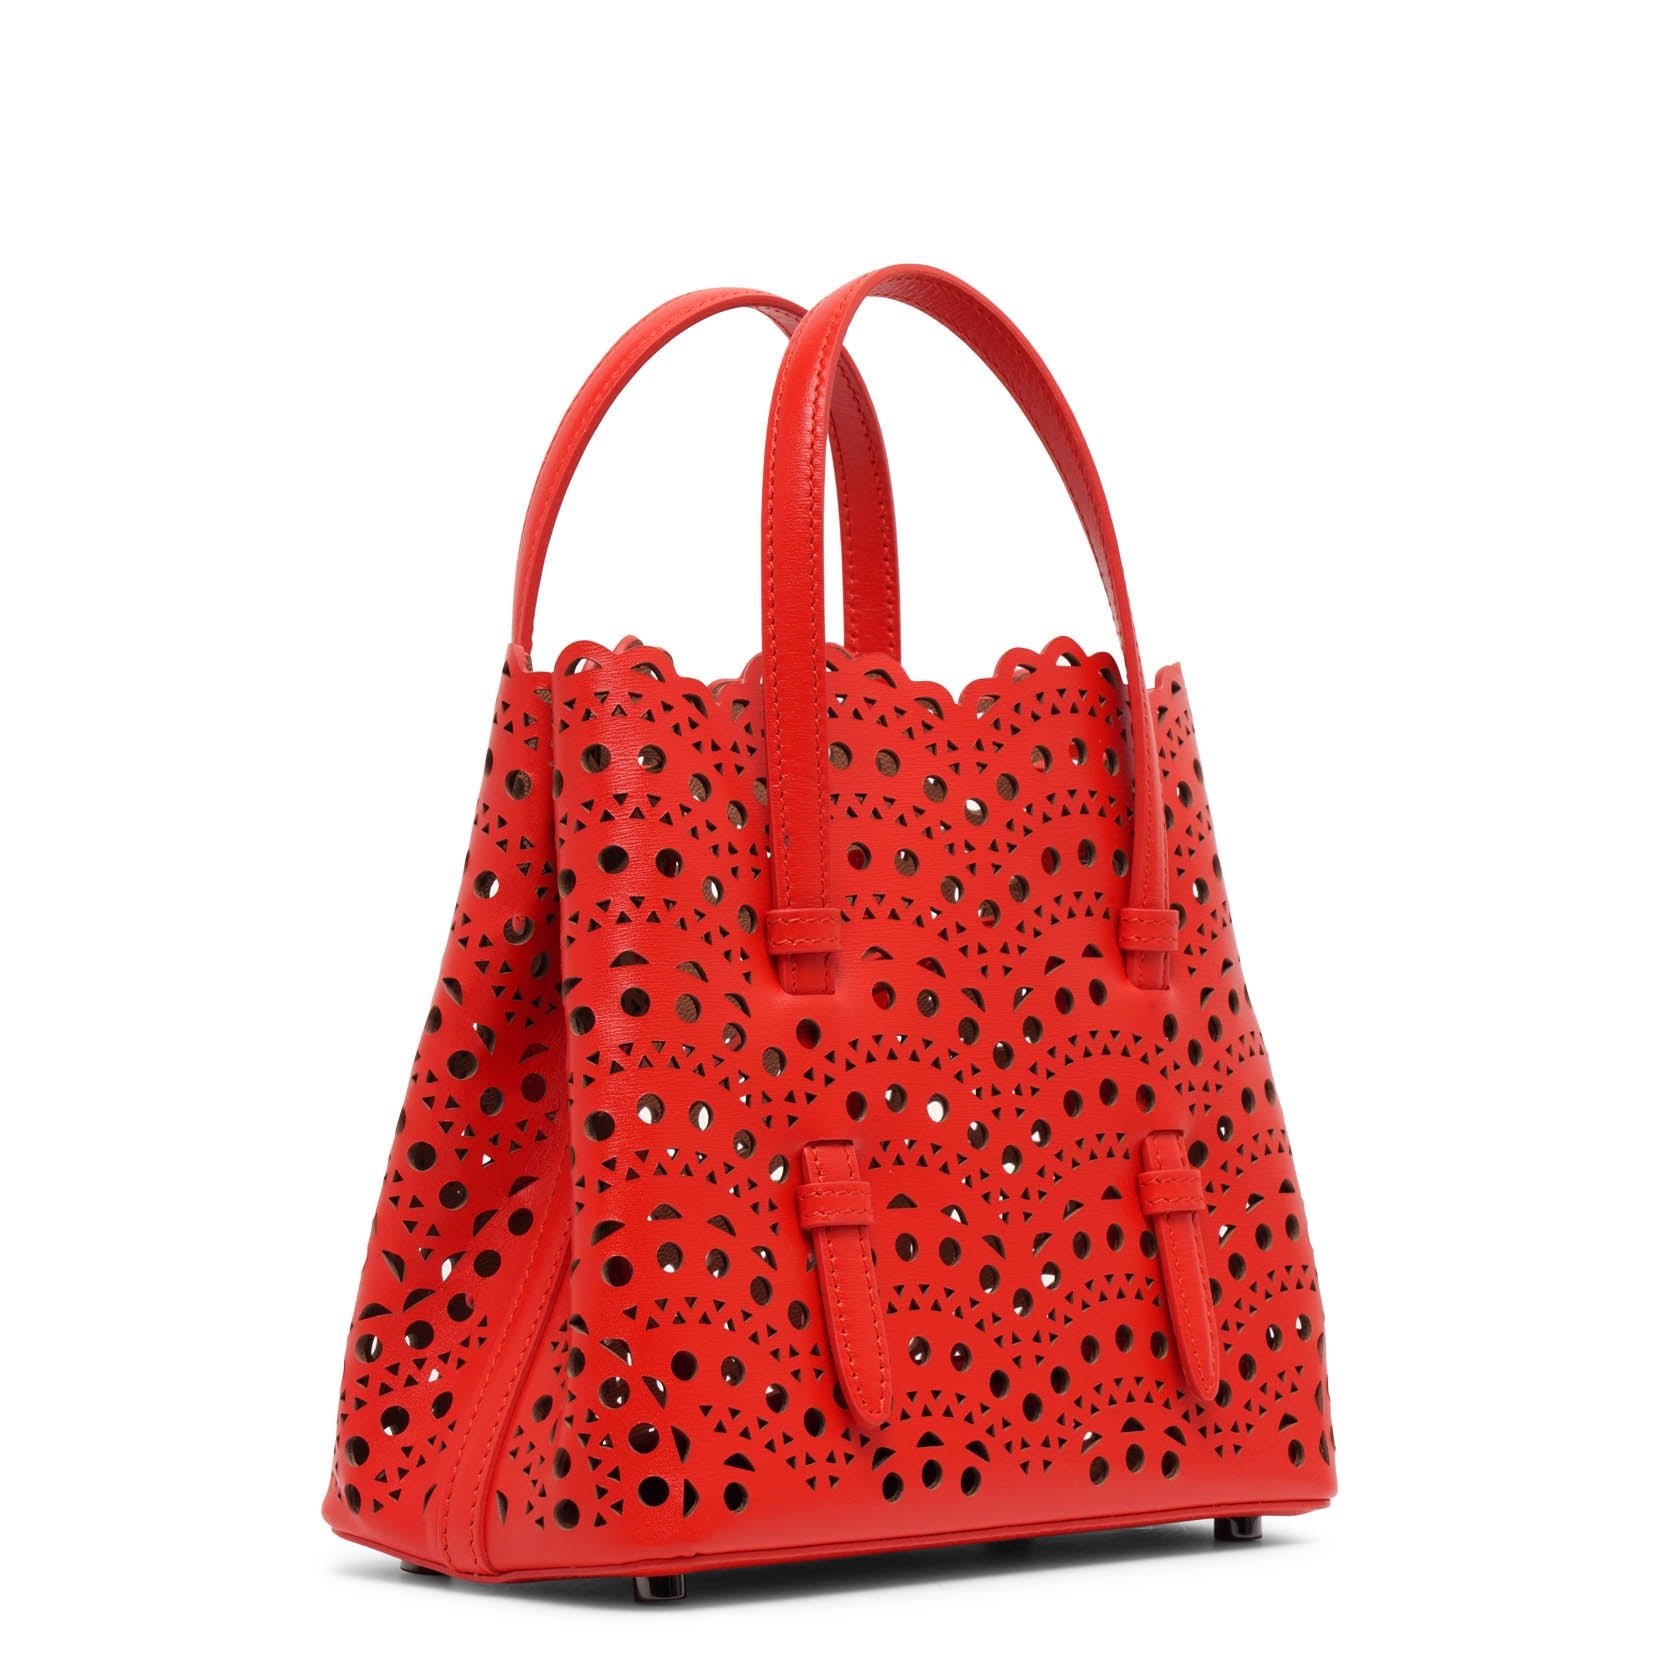 Mina 20 vienne vague red leather tote bag